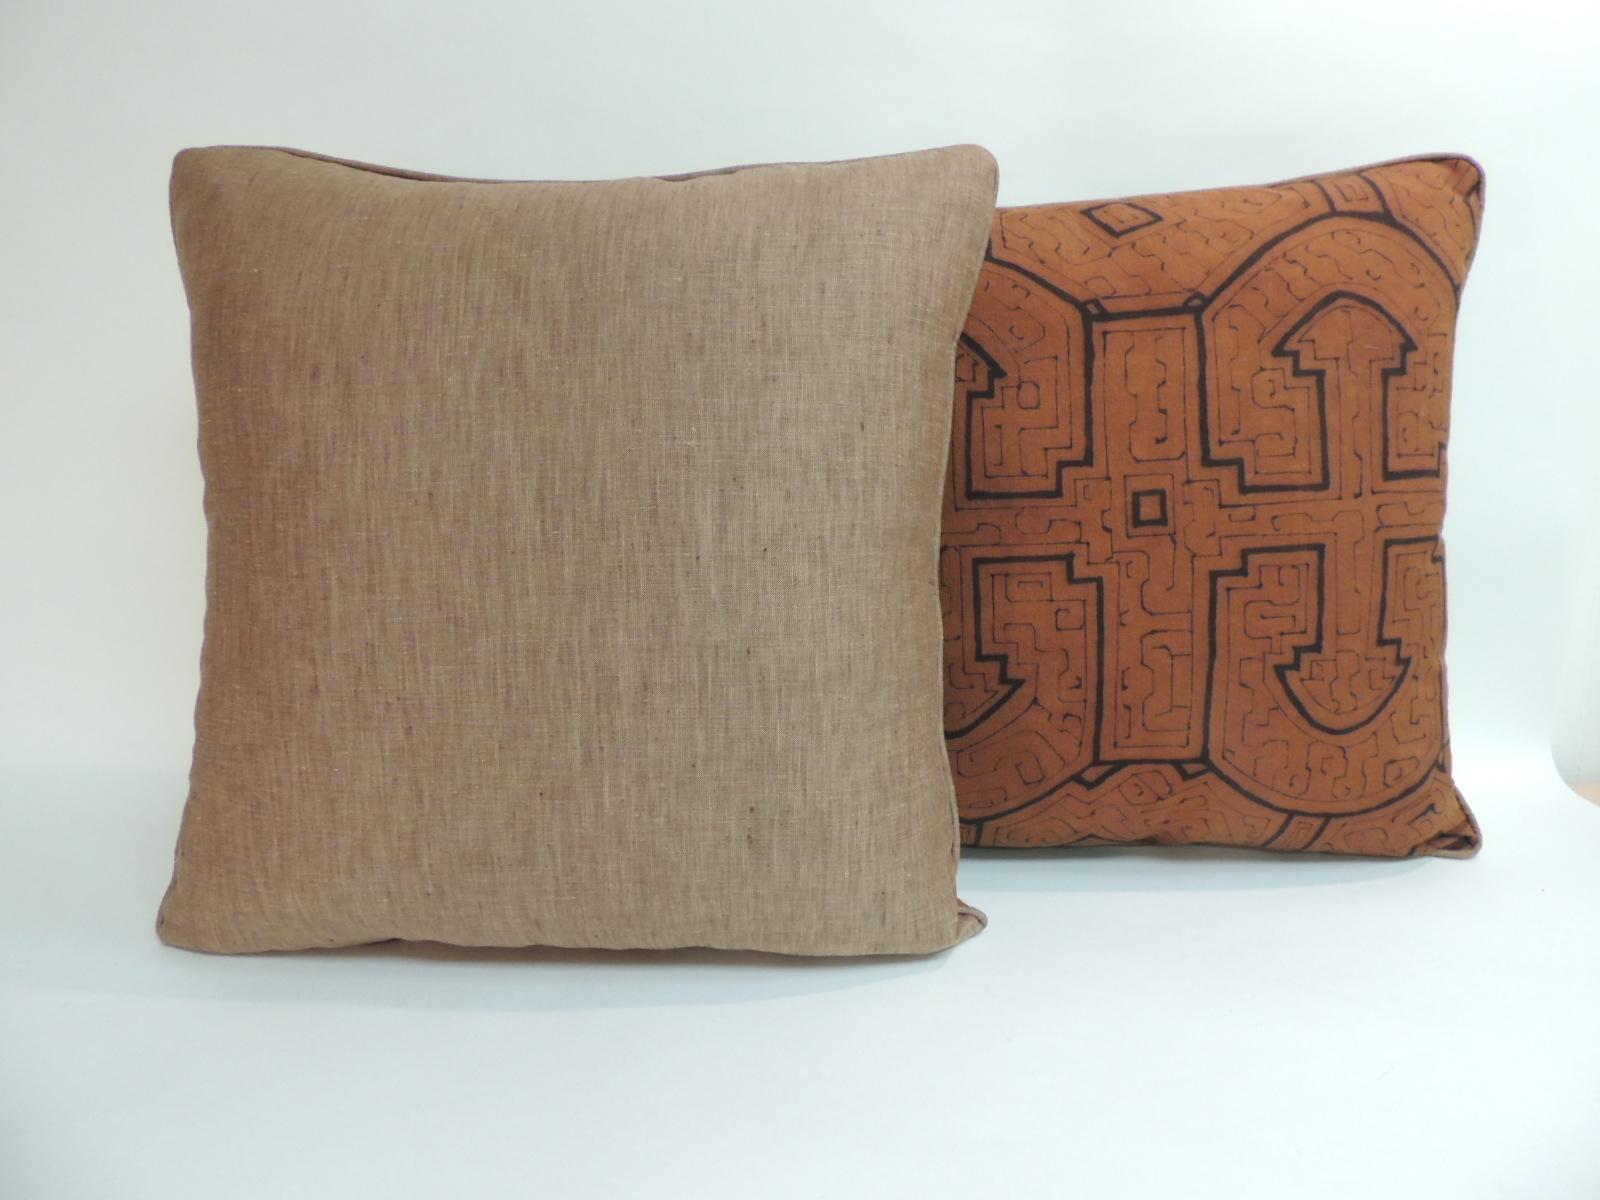 Hand-Crafted Graphic Tribal Peruvian Textile in Orange and Black Decorative Pillows #3, Pair